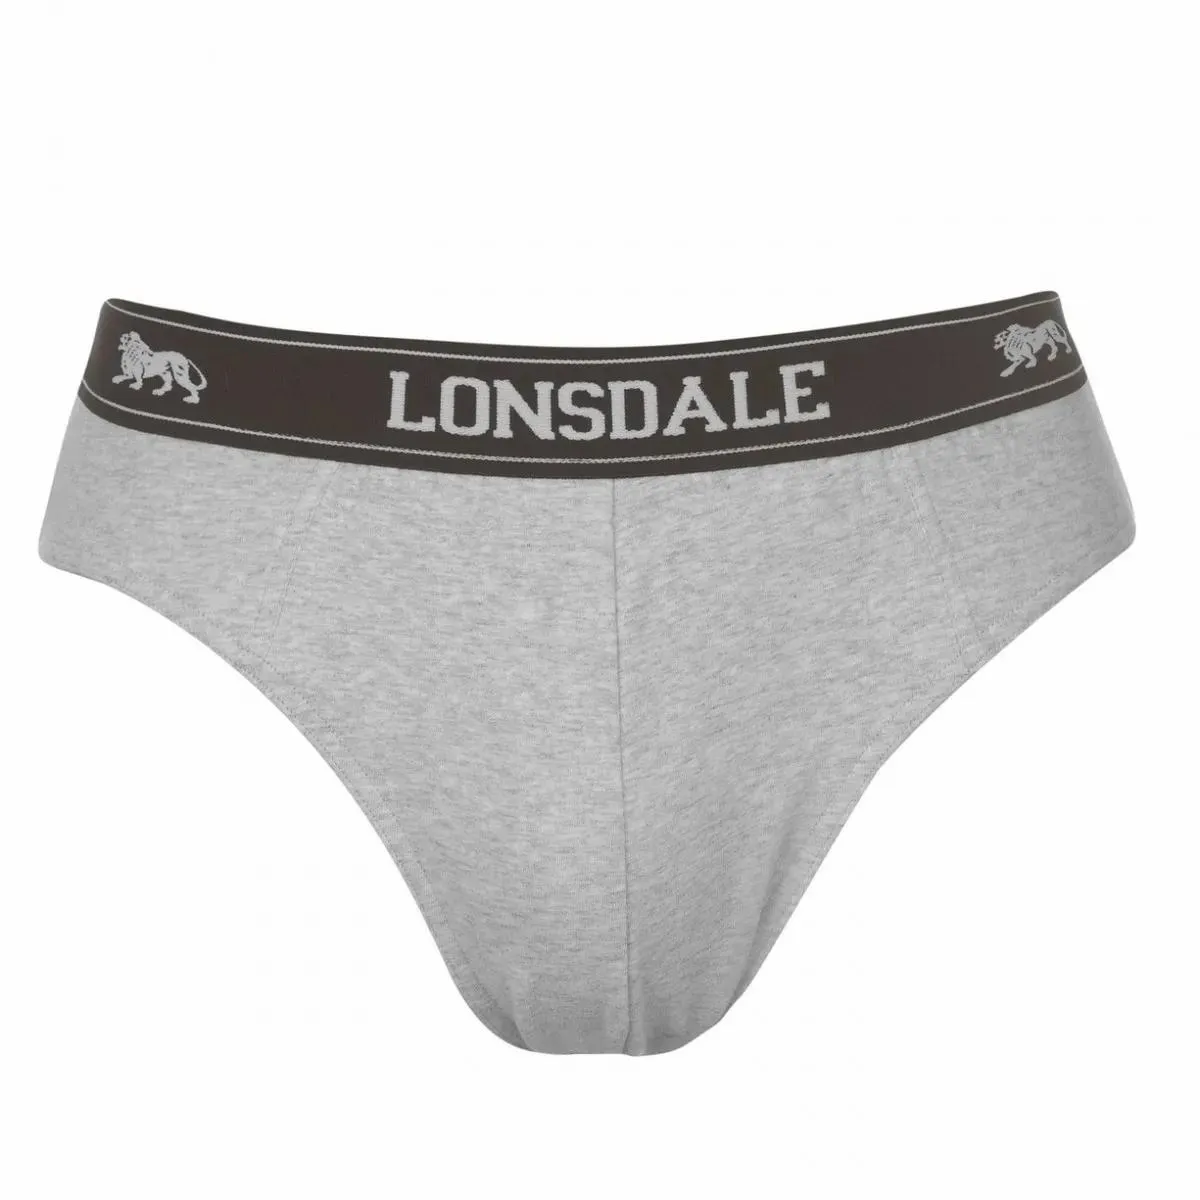 Lonsdale Lonsdale 2Pk Brief Sn00 